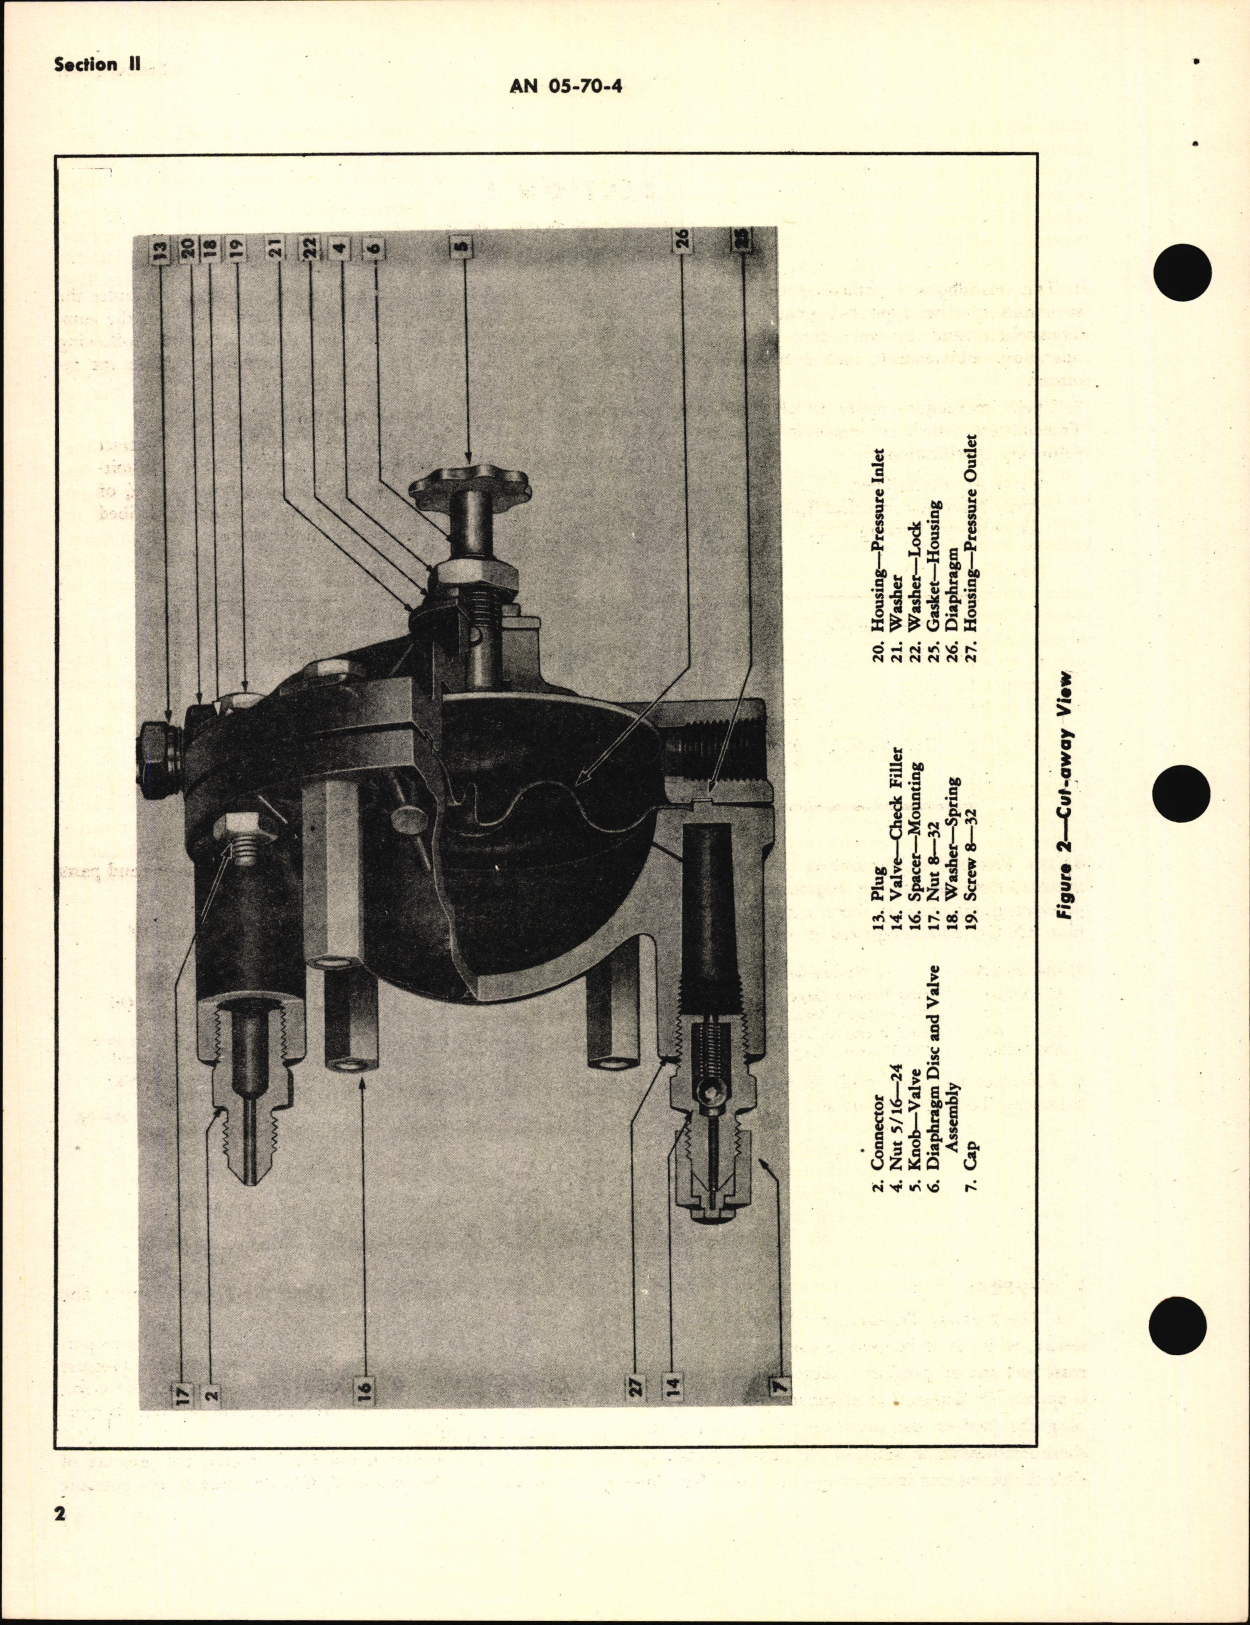 Sample page 6 from AirCorps Library document: Handbook of instructions with Parts Catalog for F.S.S.C. 88-T-2145 and A-1 Pressure Transmitter (Fuel & Oil)